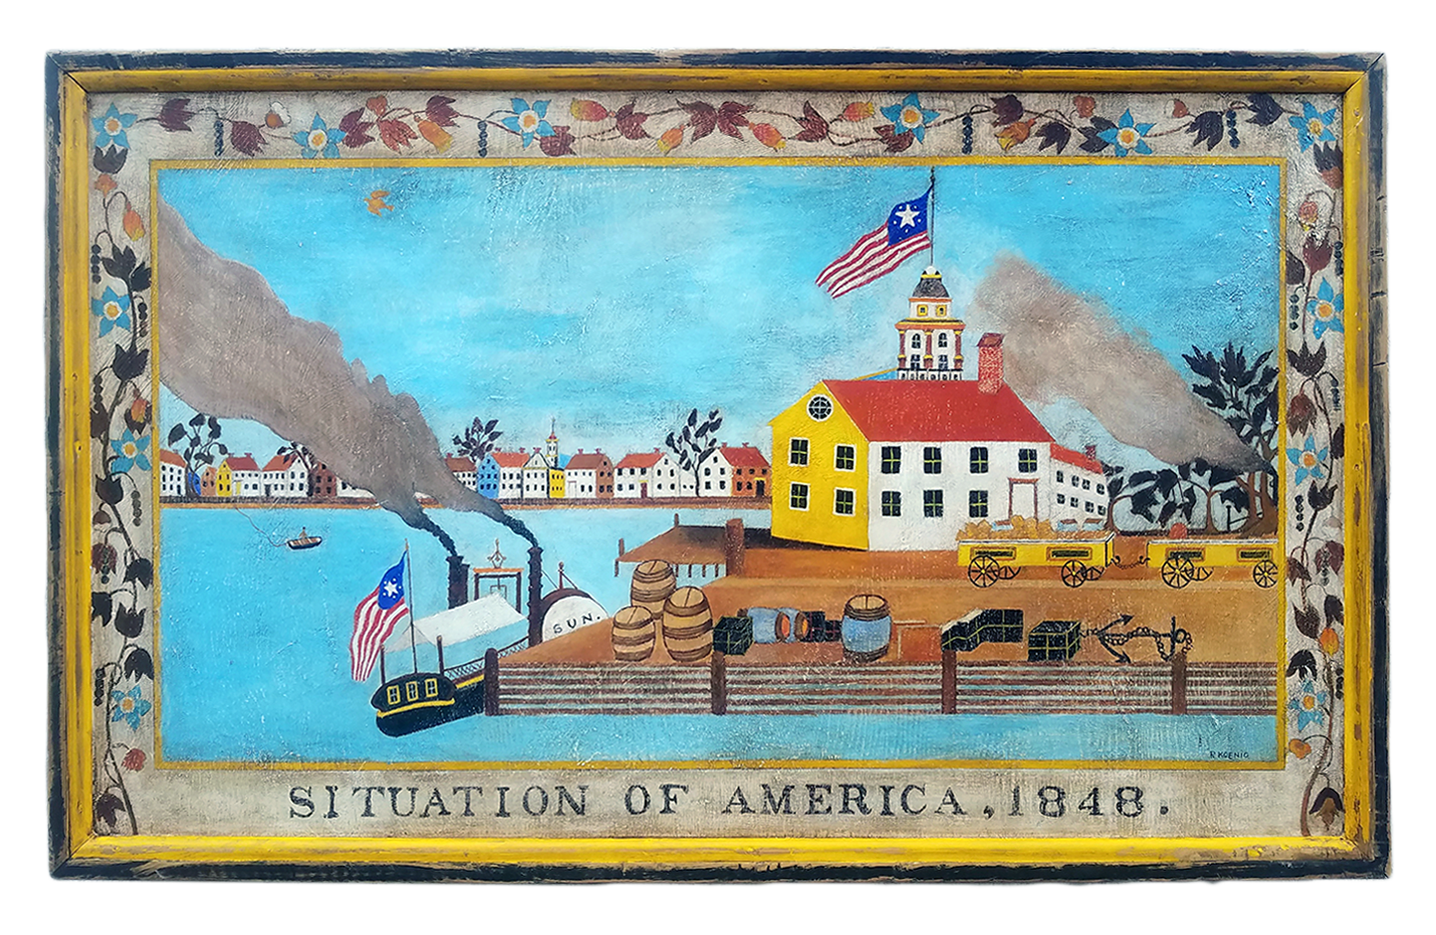 "Situation of America" Mixed media on pine by Peter Koenig